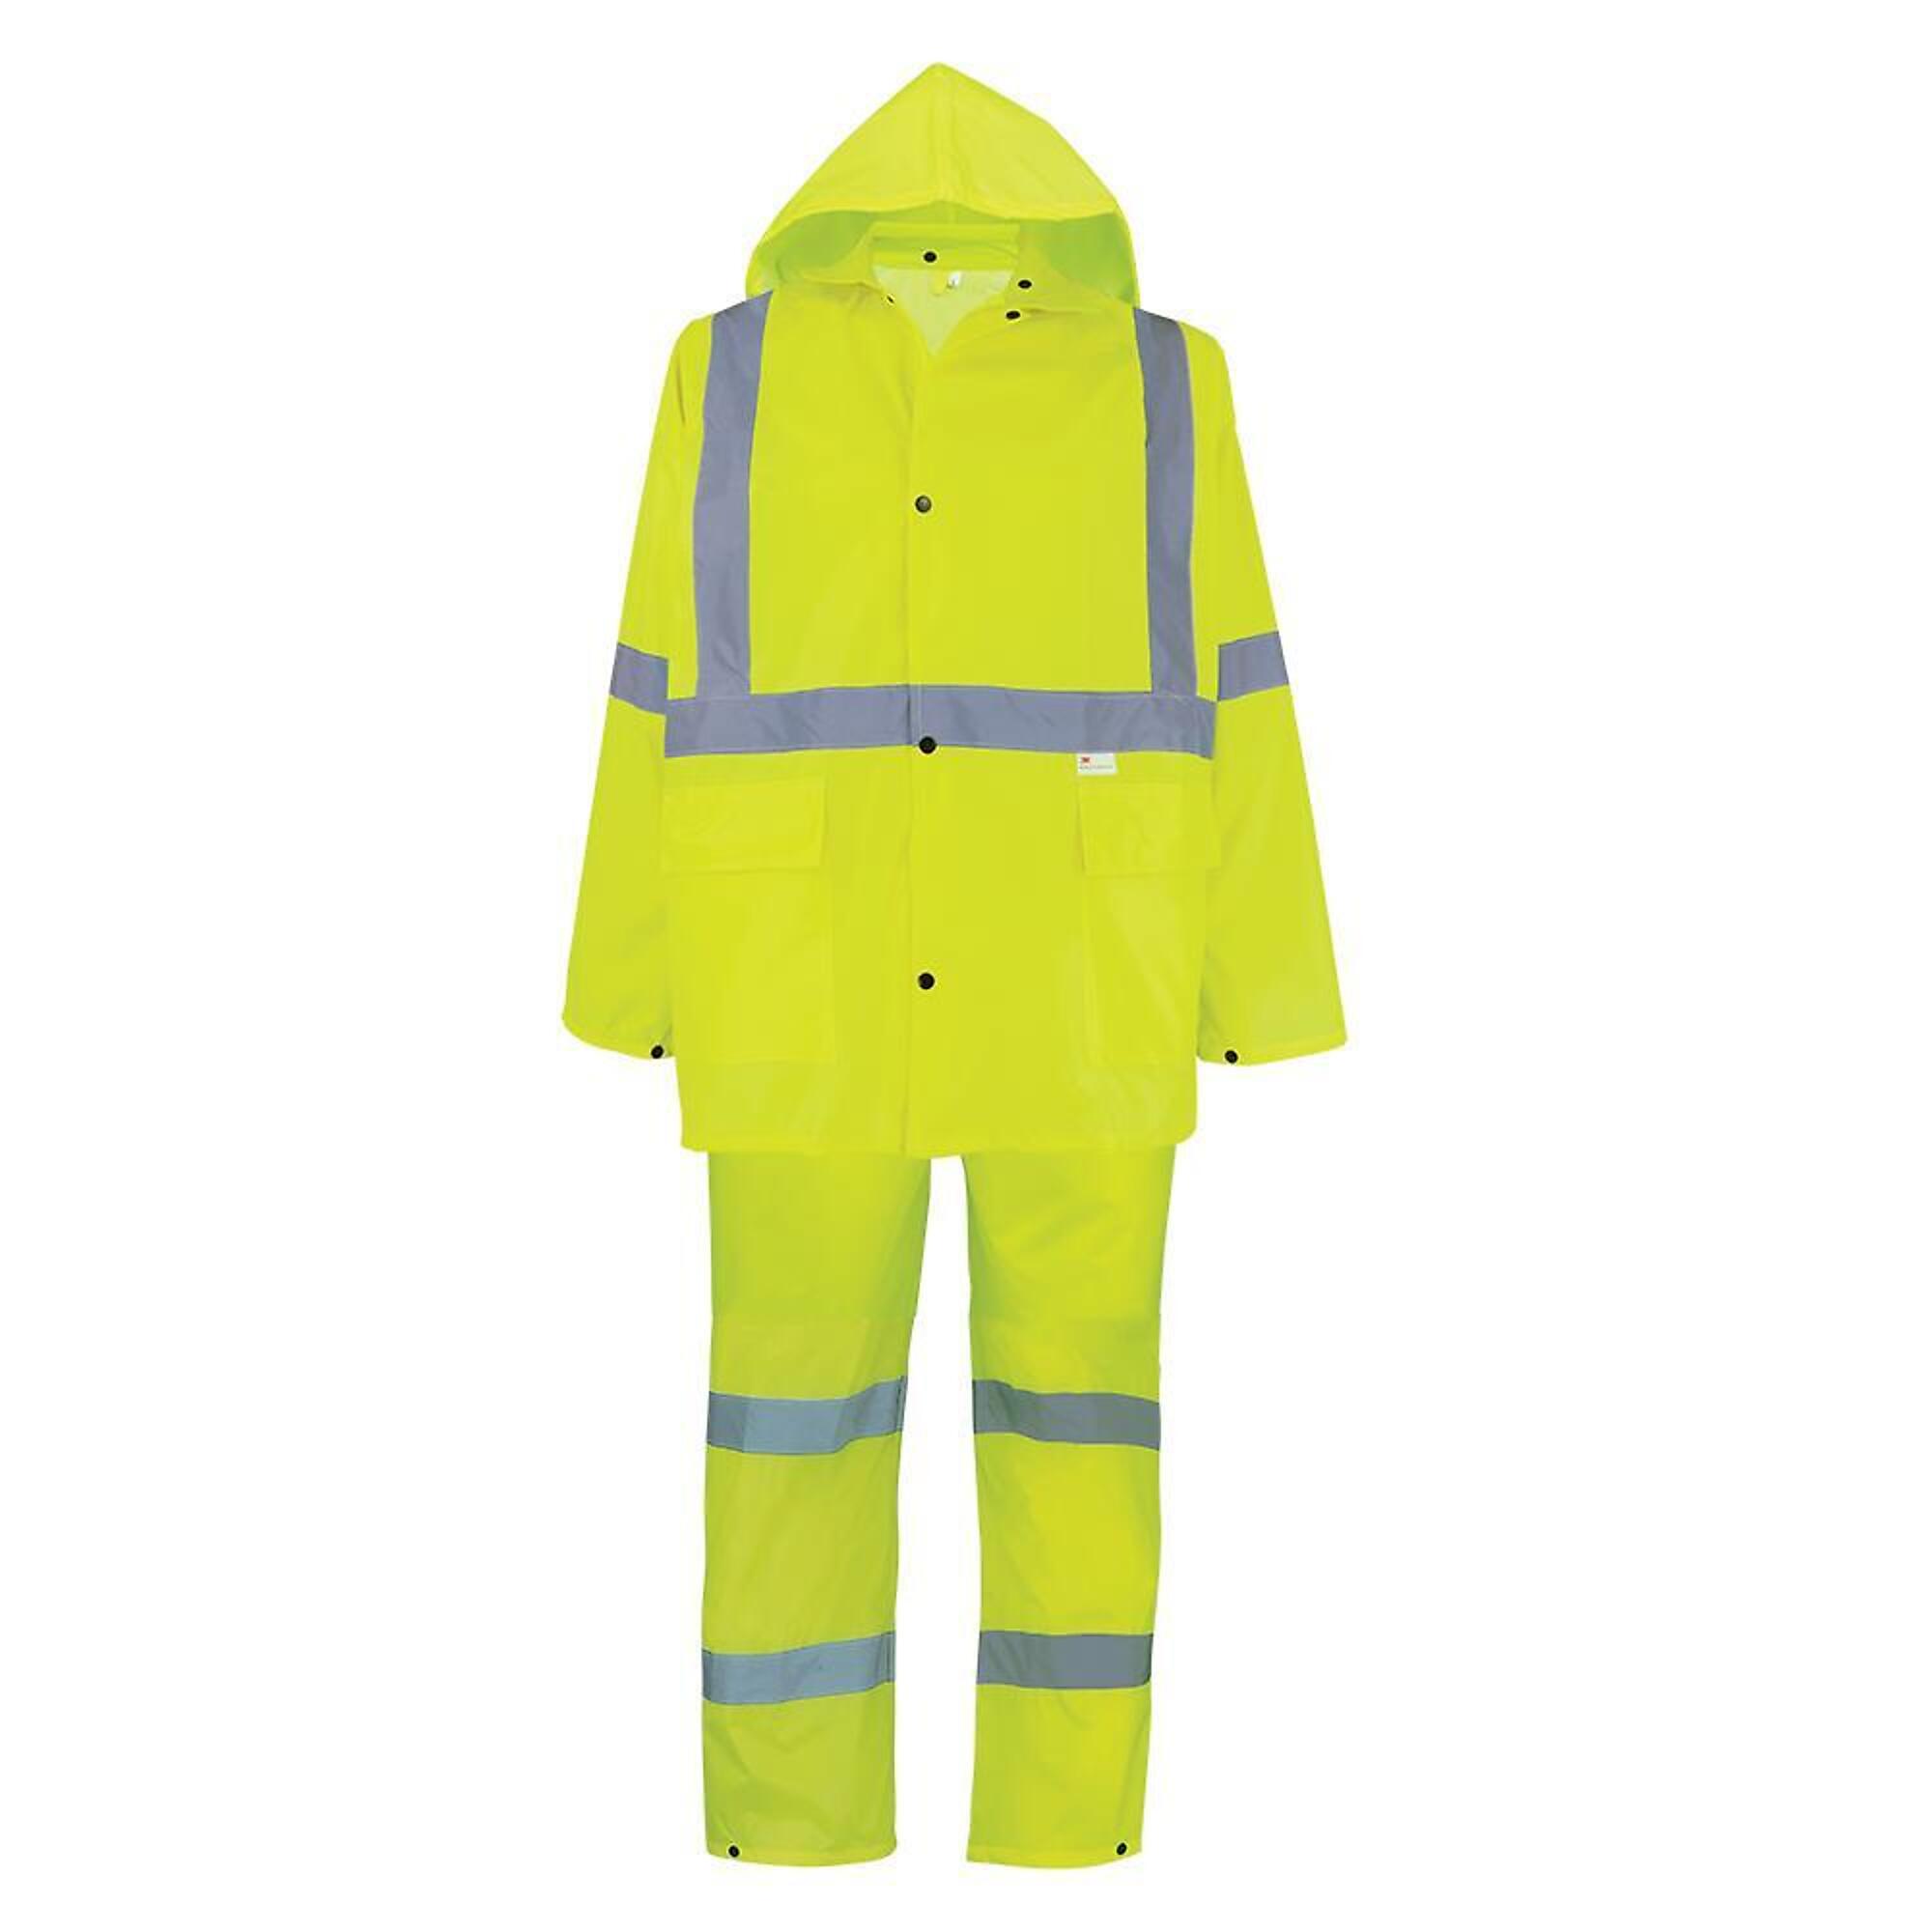 FrogWear, HV Yellow/Green, Class 3 Three-Piece Rain Suit, Size XL, Color High-Visibility Yellow/Green, Model GLO-8000-XL